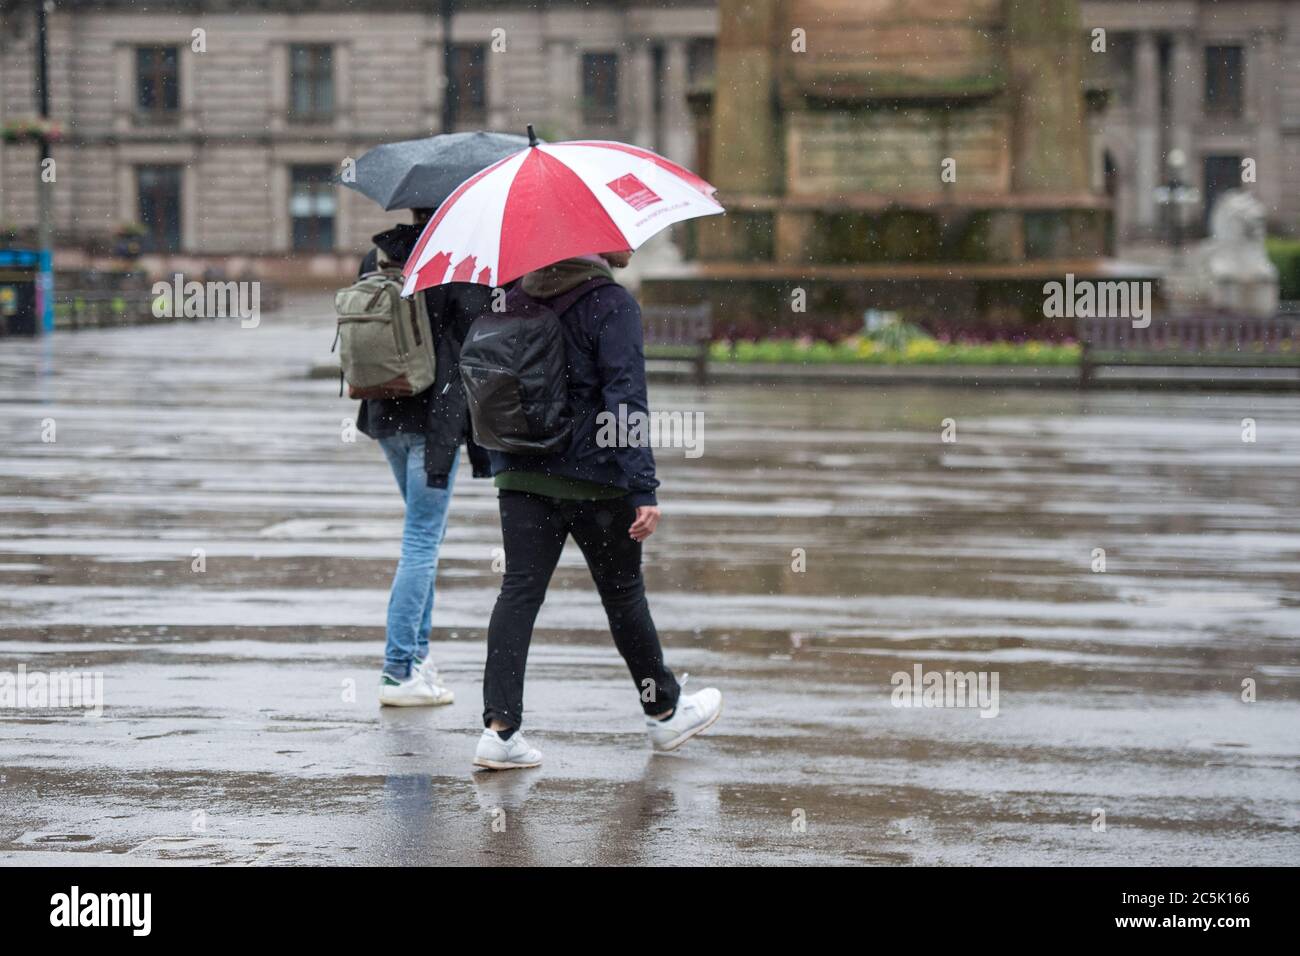 Glasgow, Scotland, UK. 3rd July, 2020. Pictured: A deserted George Square. Buchanan Street shopping area with shoppers braving the pouring rain using umbrellas and face coverings which will become mandatory on 10th July next week. Credit: Colin Fisher/Alamy Live News Stock Photo